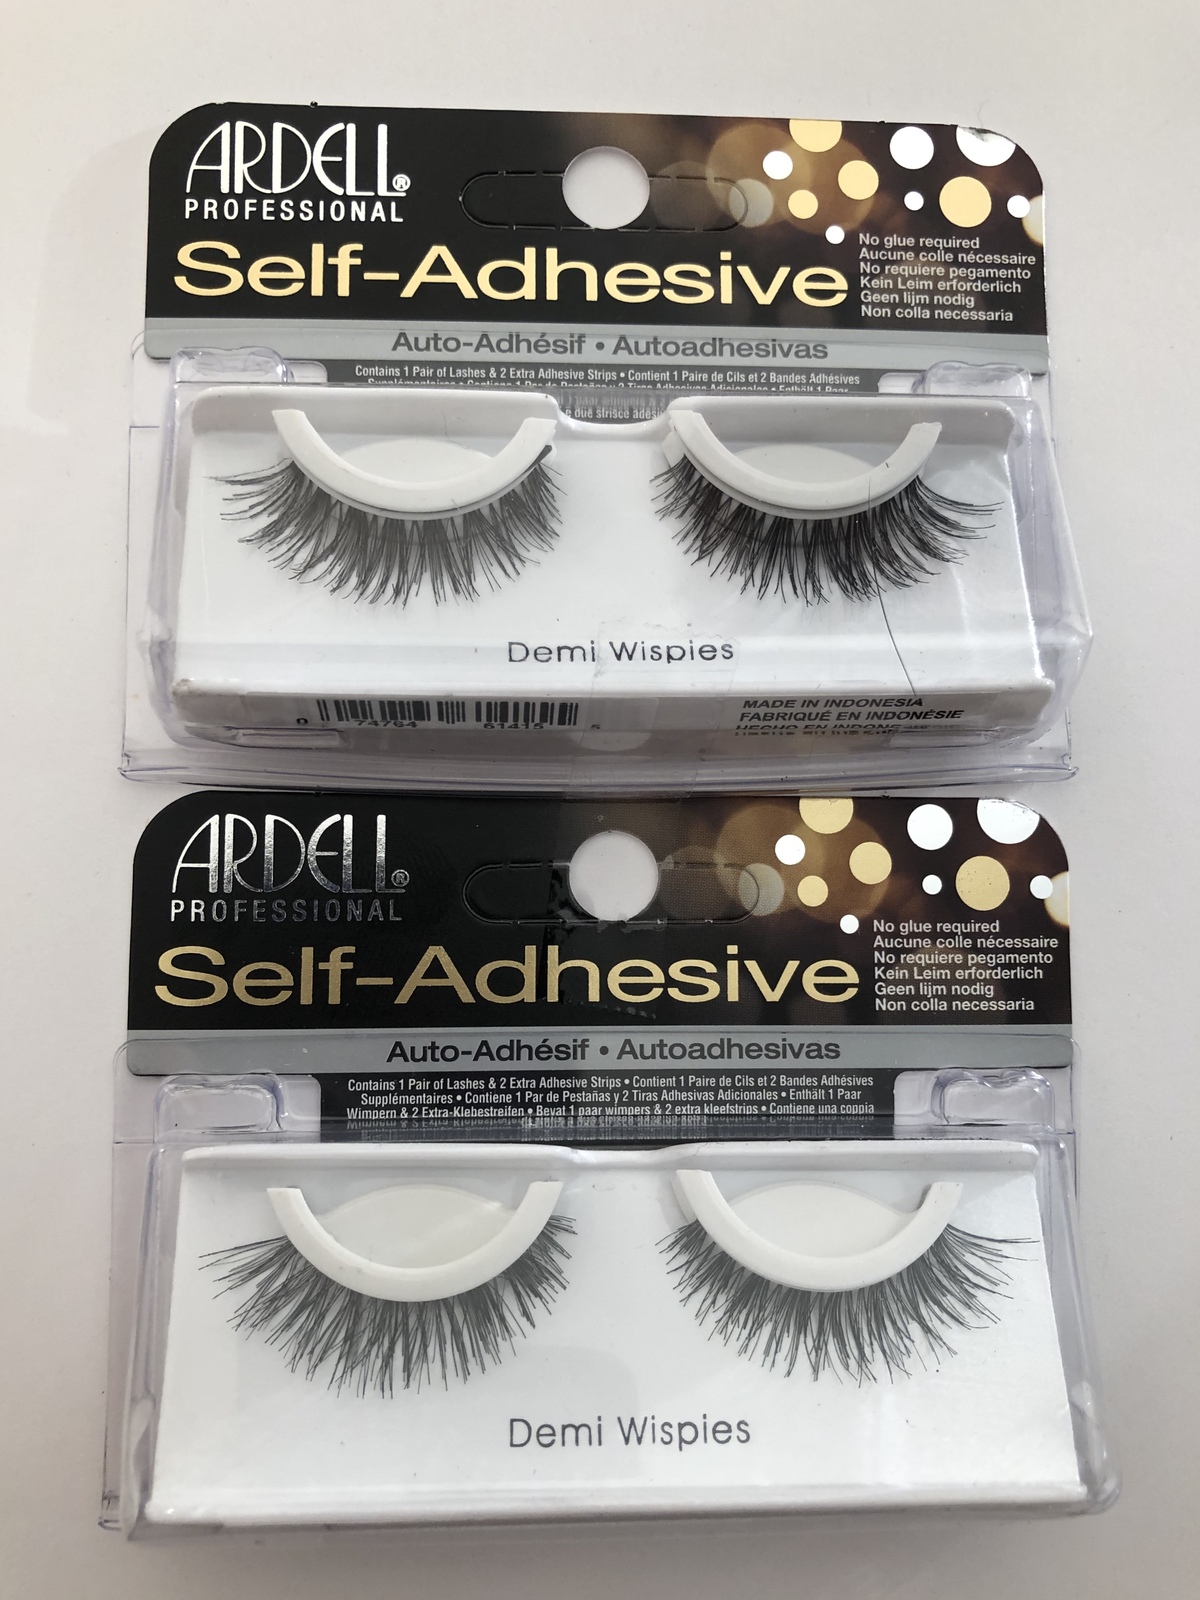 Primary image for Ardell Professional Self Adhesive Demi Wispies Lashes ( two packs )